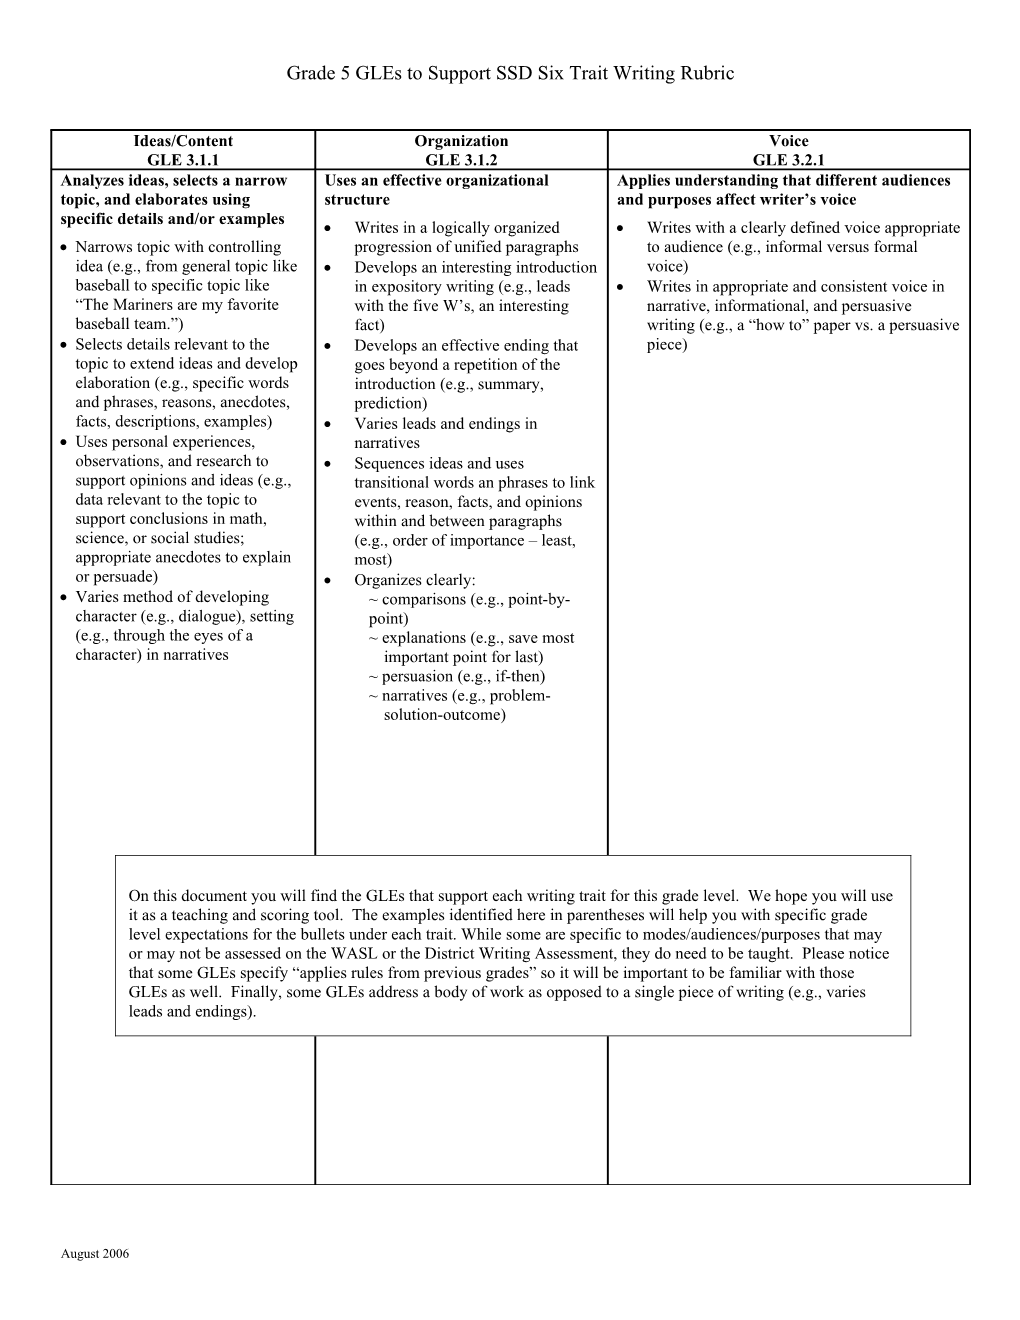 Grade 5 Gles for District Writing Assessment